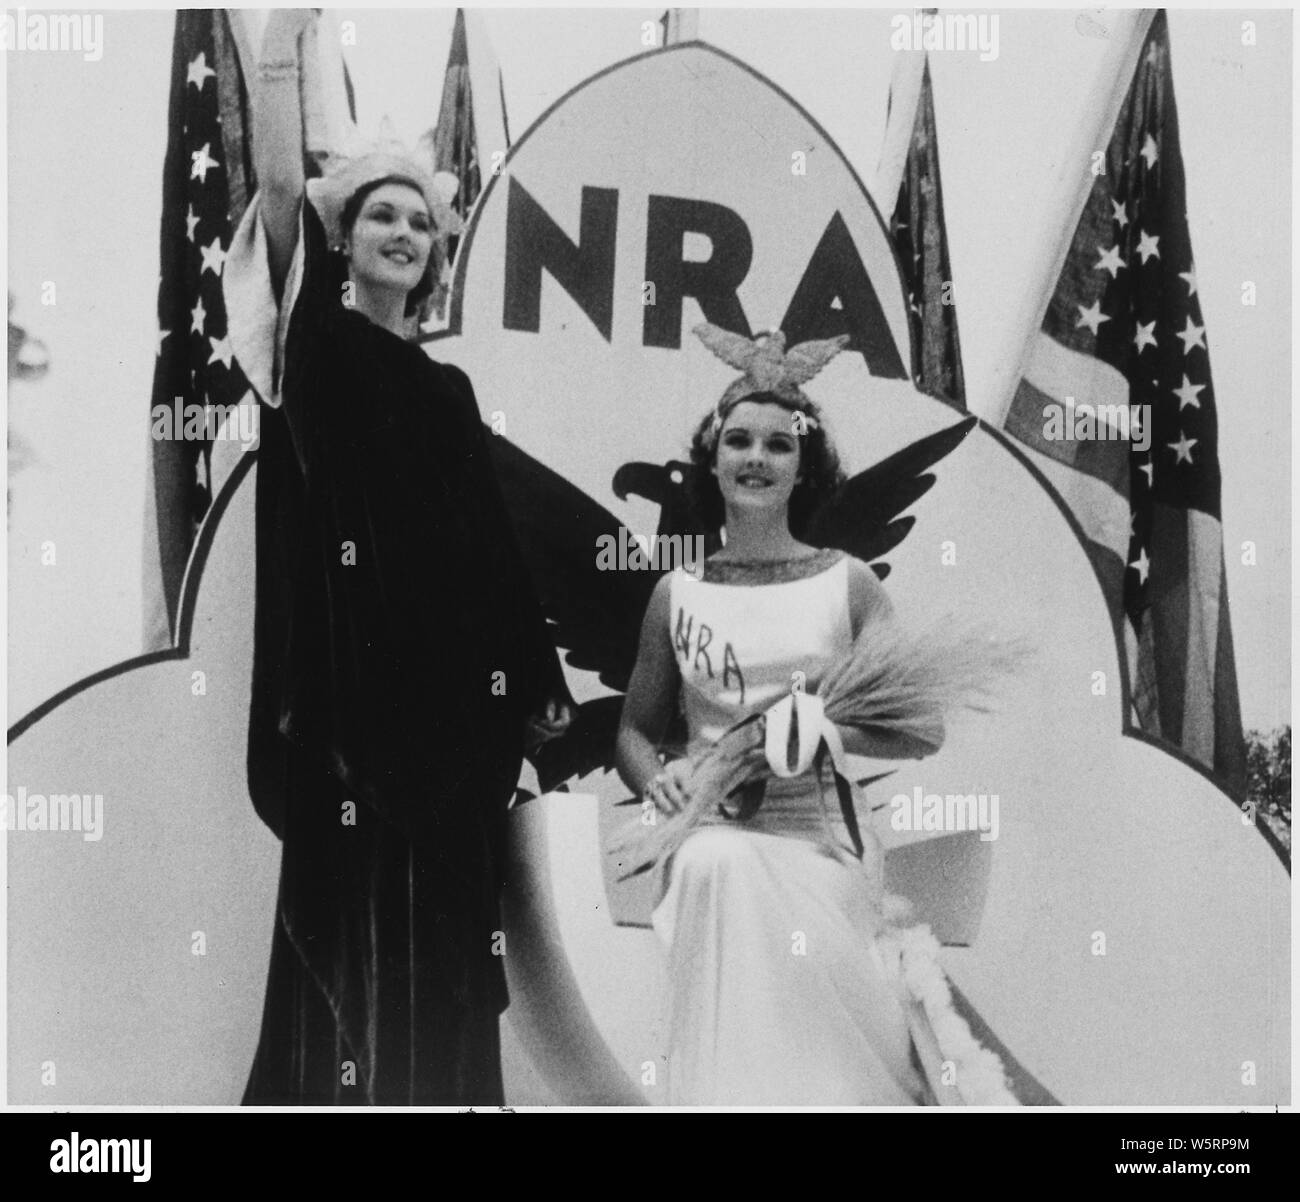 NRA:posed shot of two woman dressed in costumes promoting National Recovery Administration programs with blue eagle emblem, NRA letters, and American flags in background Stock Photo